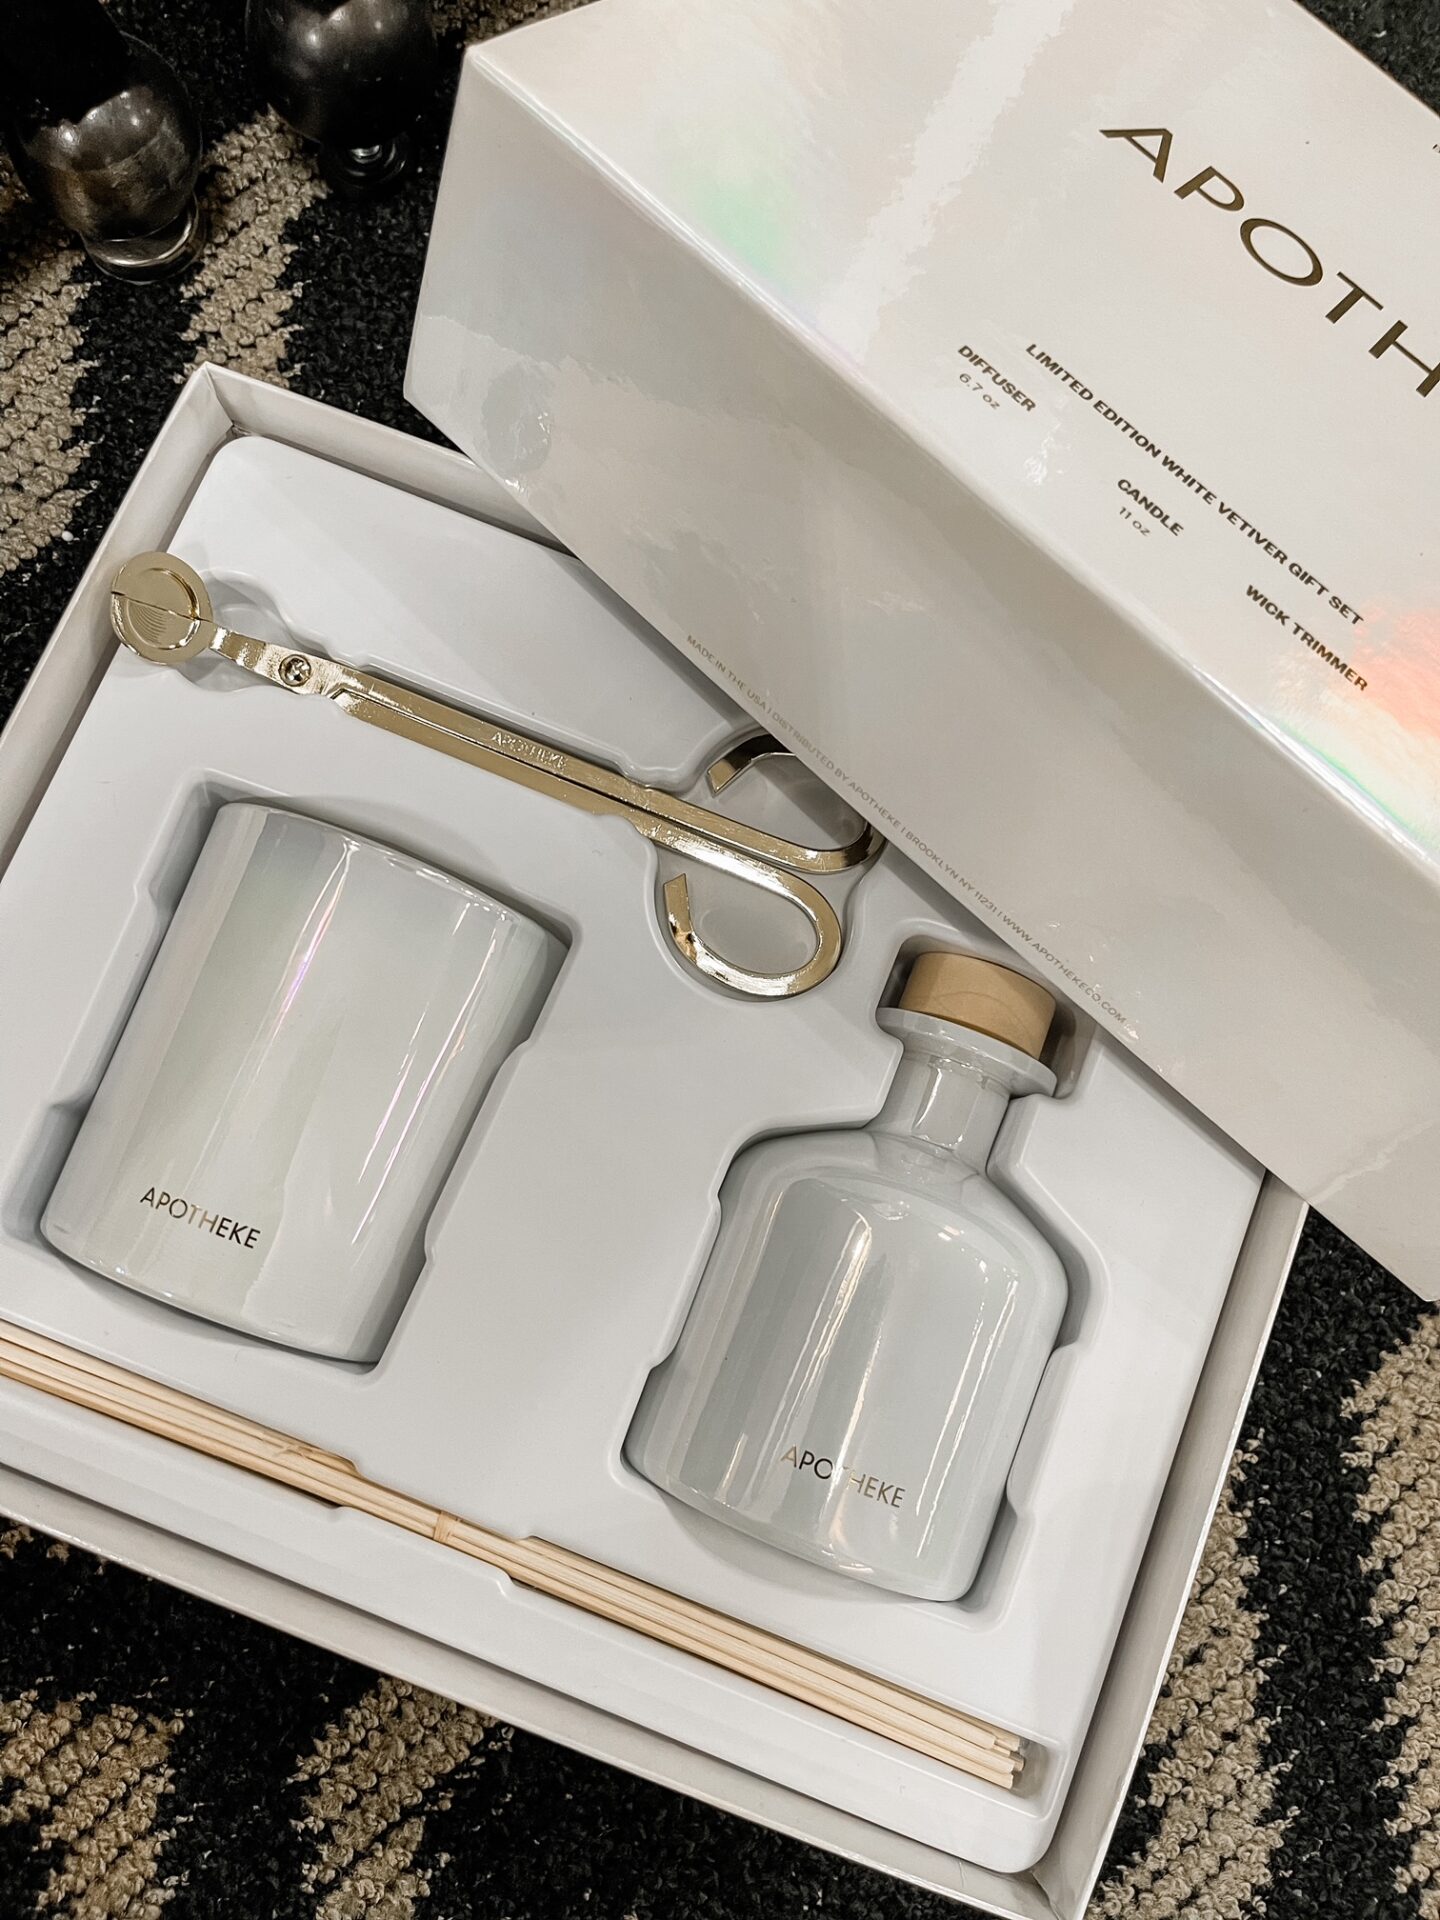 Nordstrom Anniversary Sale by popular Nashville fashion blog, Hello Happiness: image of Nordstrom Apotheke gift set. 